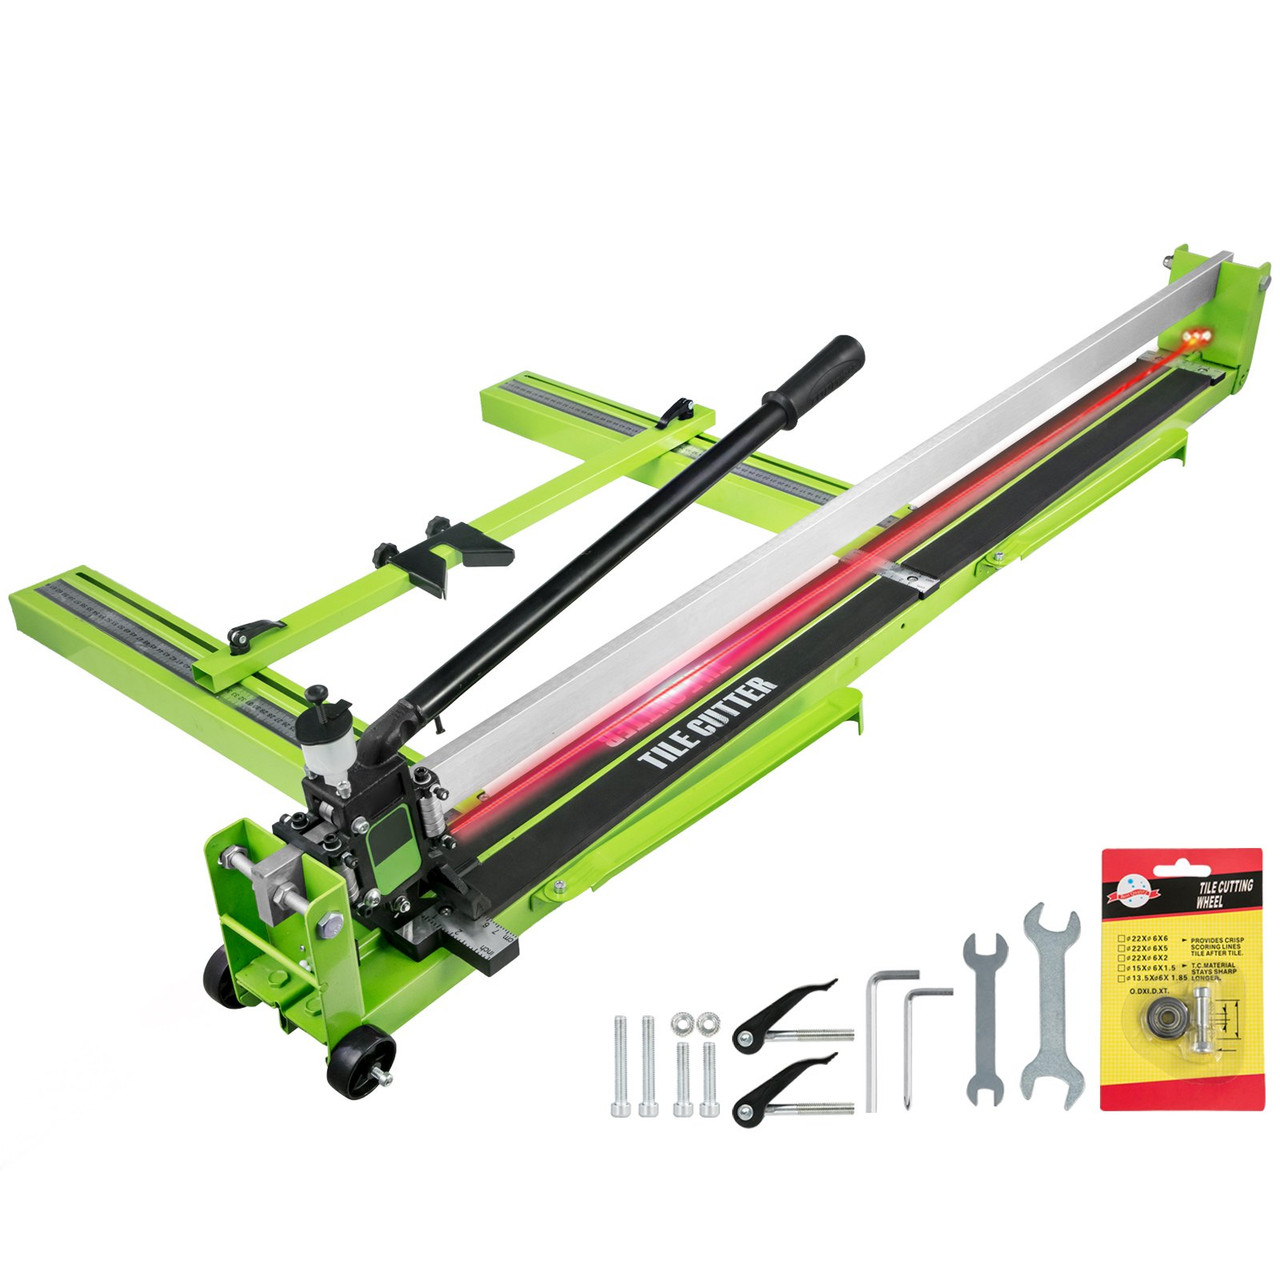 Tile Cutter 35.4 Inch, Manual Tile Cutter All-Steel Frame,Tile Cutting Machine w/Laser Guide and Bonus Spare Cutter,Tile Cutter Hand Tool for Precision Cutting Porcelain Ceramic Floor Tiles